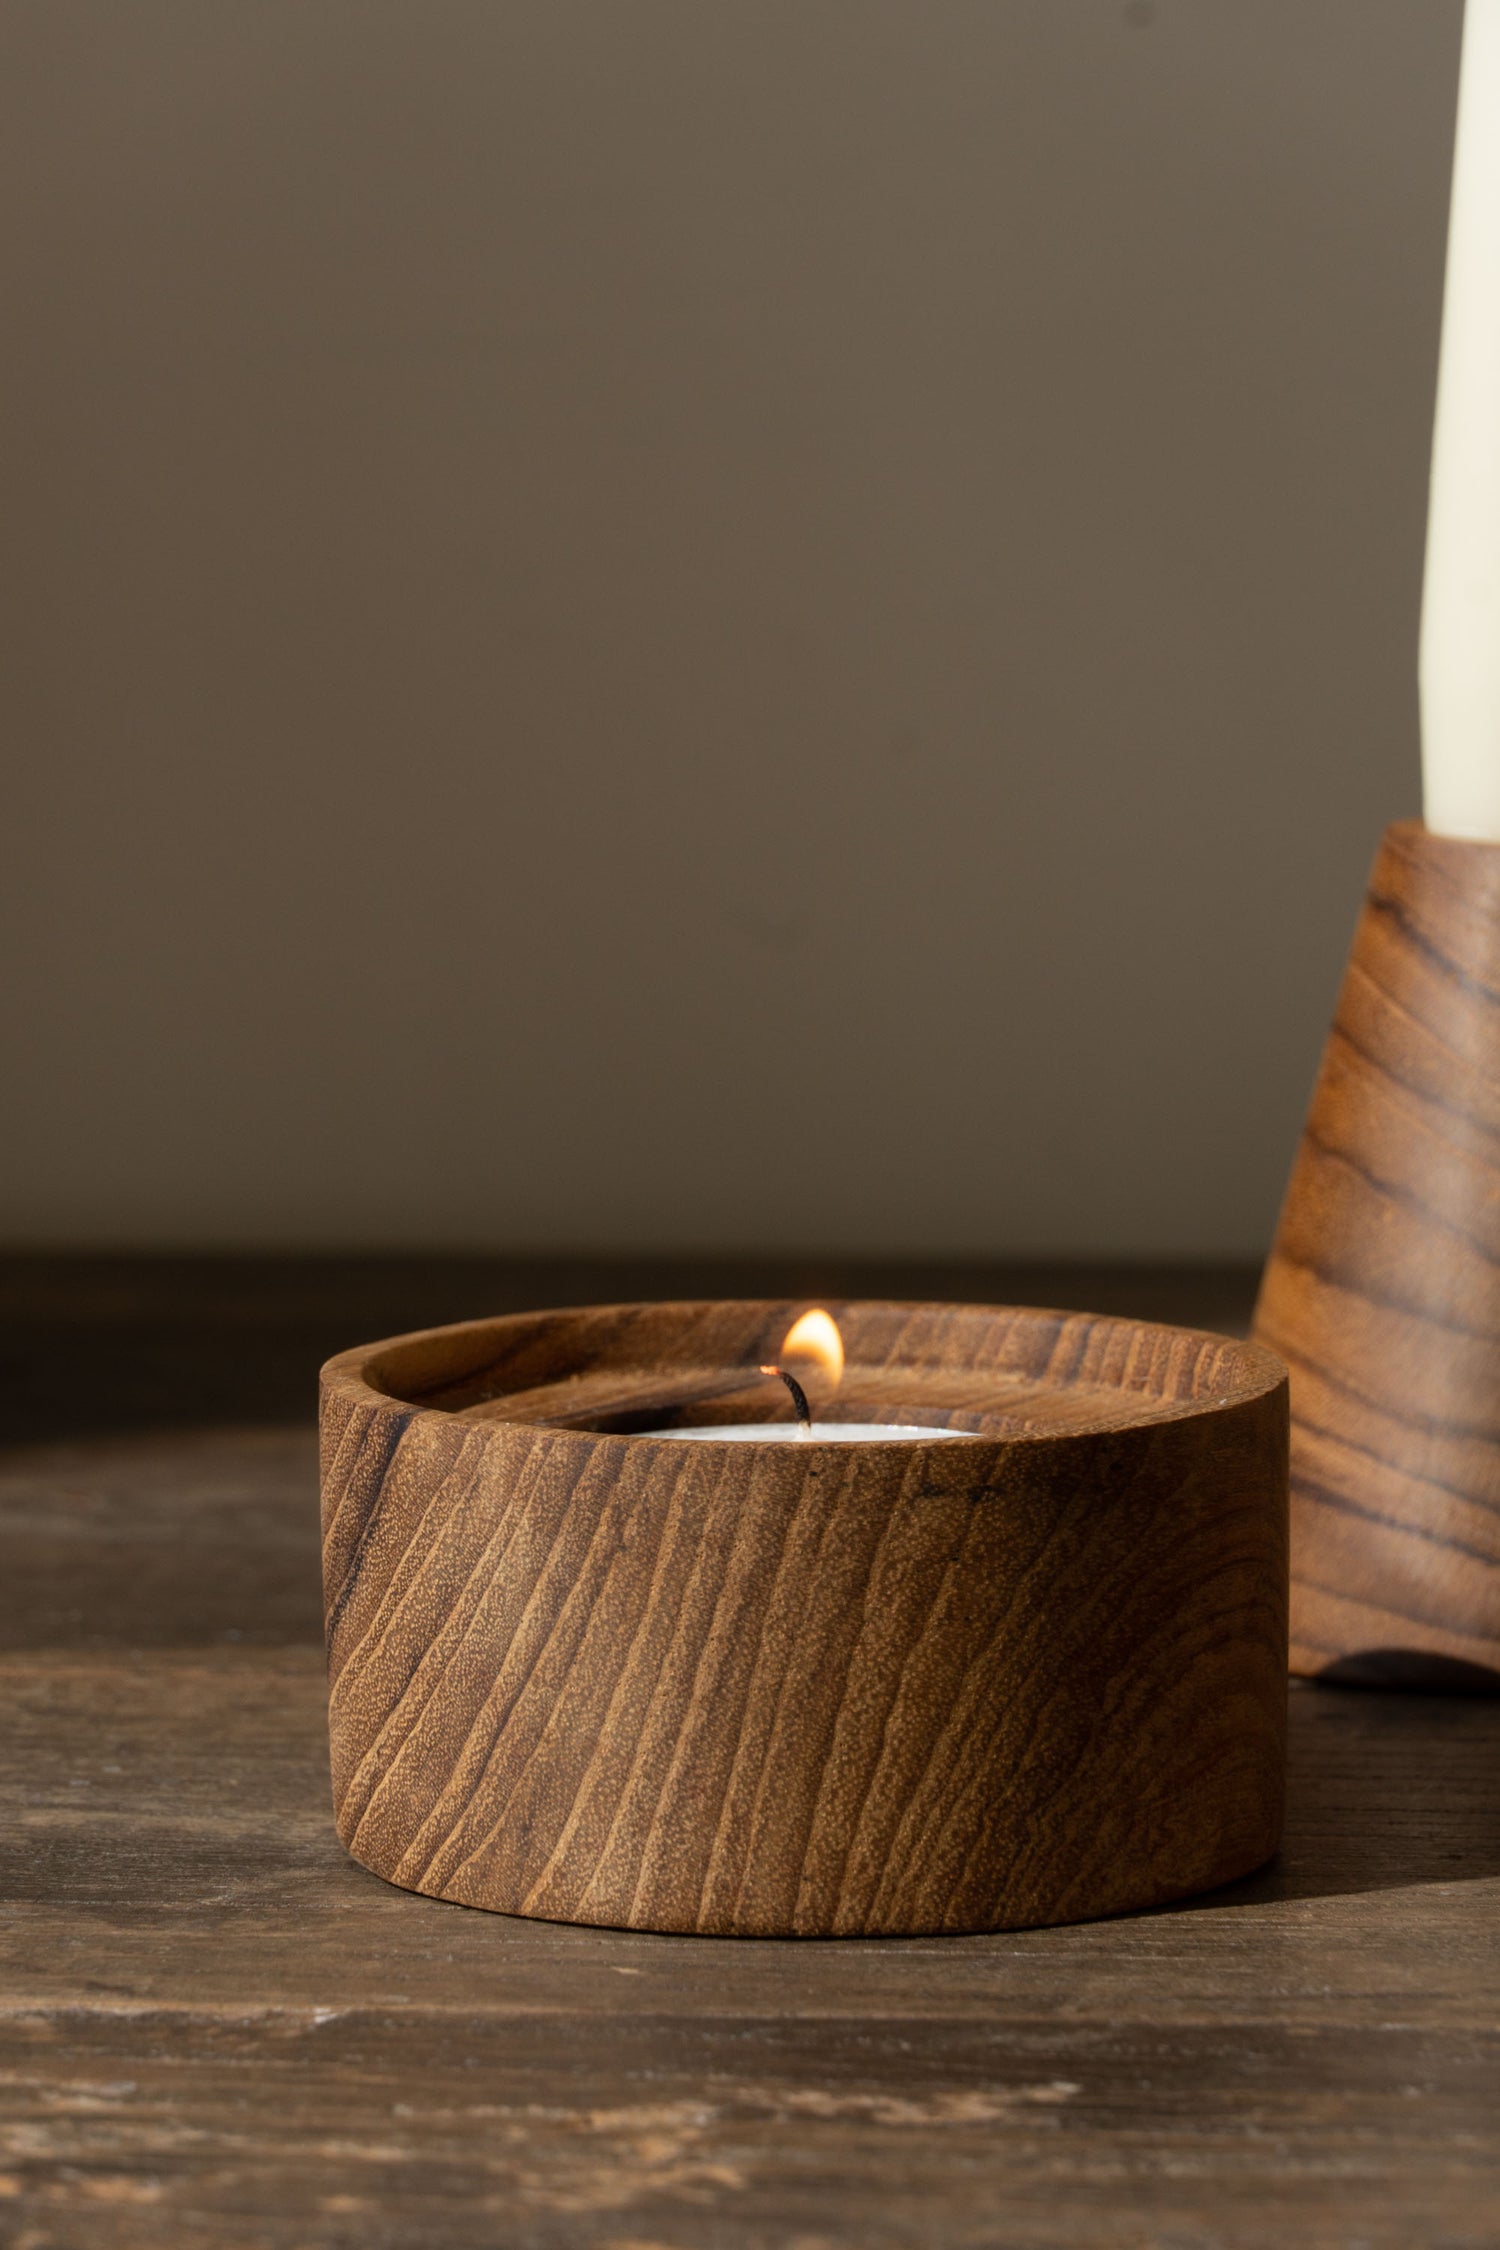 Cilinder of the Block Wooden Candleholders Set.